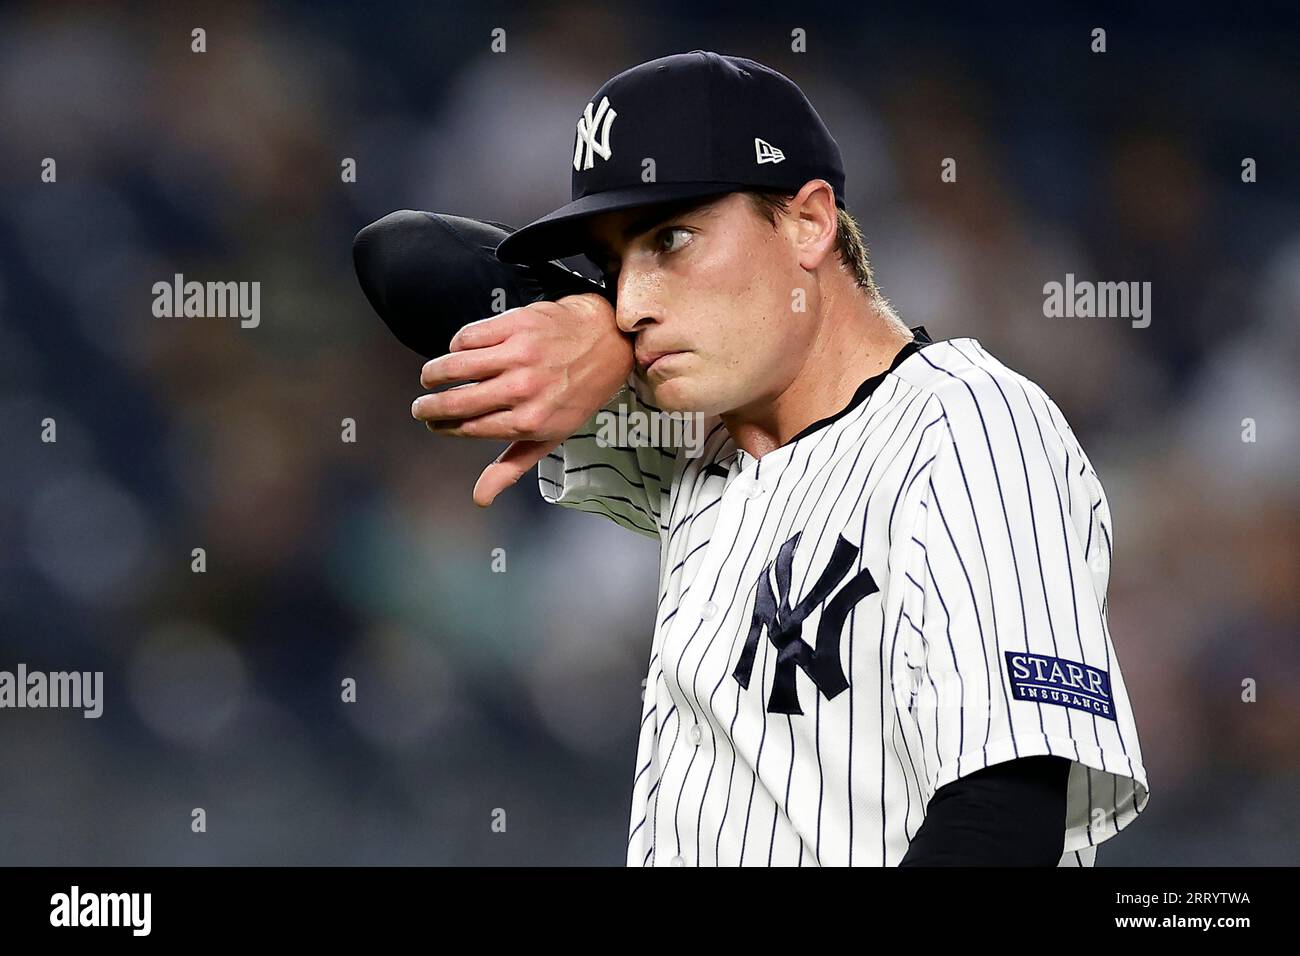 New York Yankees pitcher Ron Marinaccio reacts on the mound during